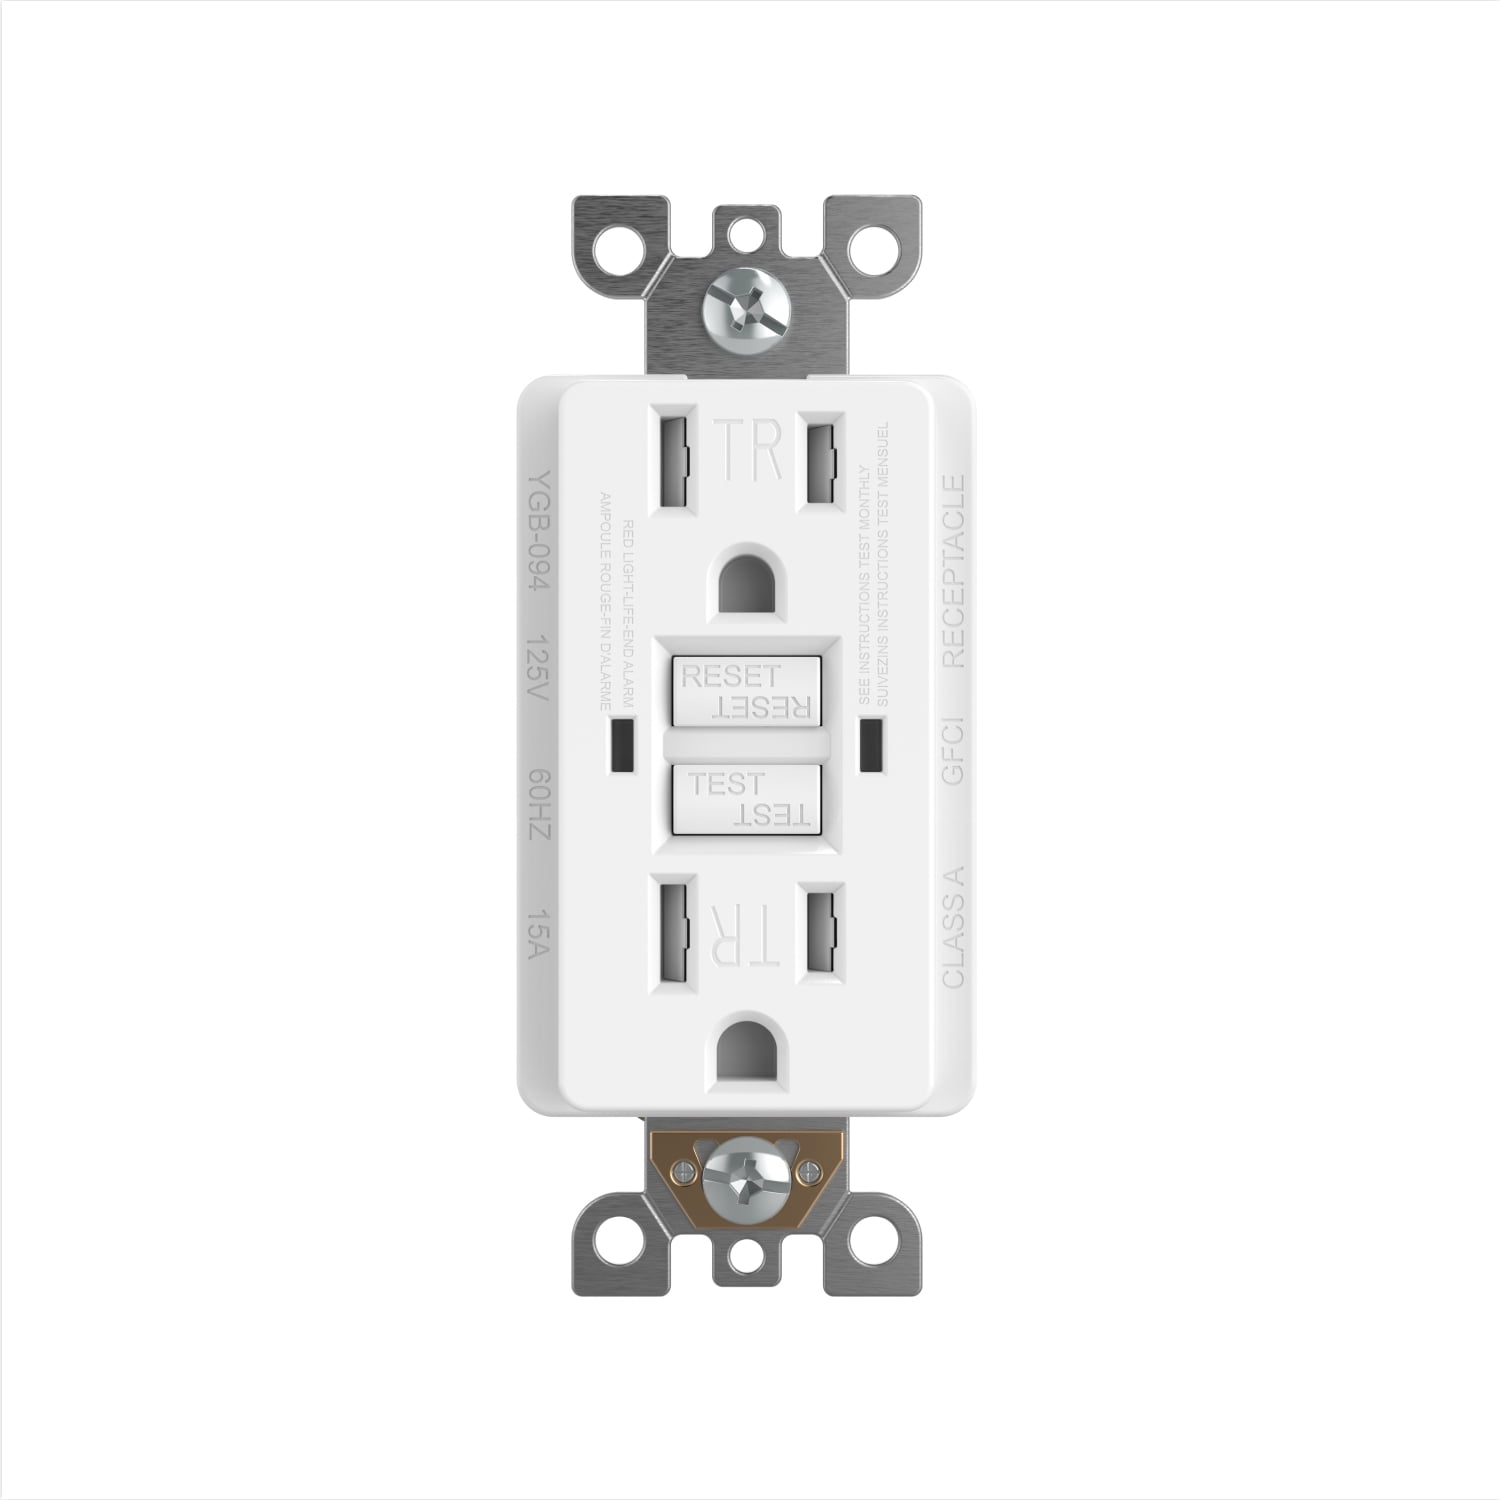 5-15R Ultra Slim GFI Dual Receptacle UL Listed ELEGRP 15 Amp GFCI Outlet Wall Plate Included TR Tamper Resistant with LED Indicator 2 Pack, White Self-Test Ground Fault Circuit Interrupters 